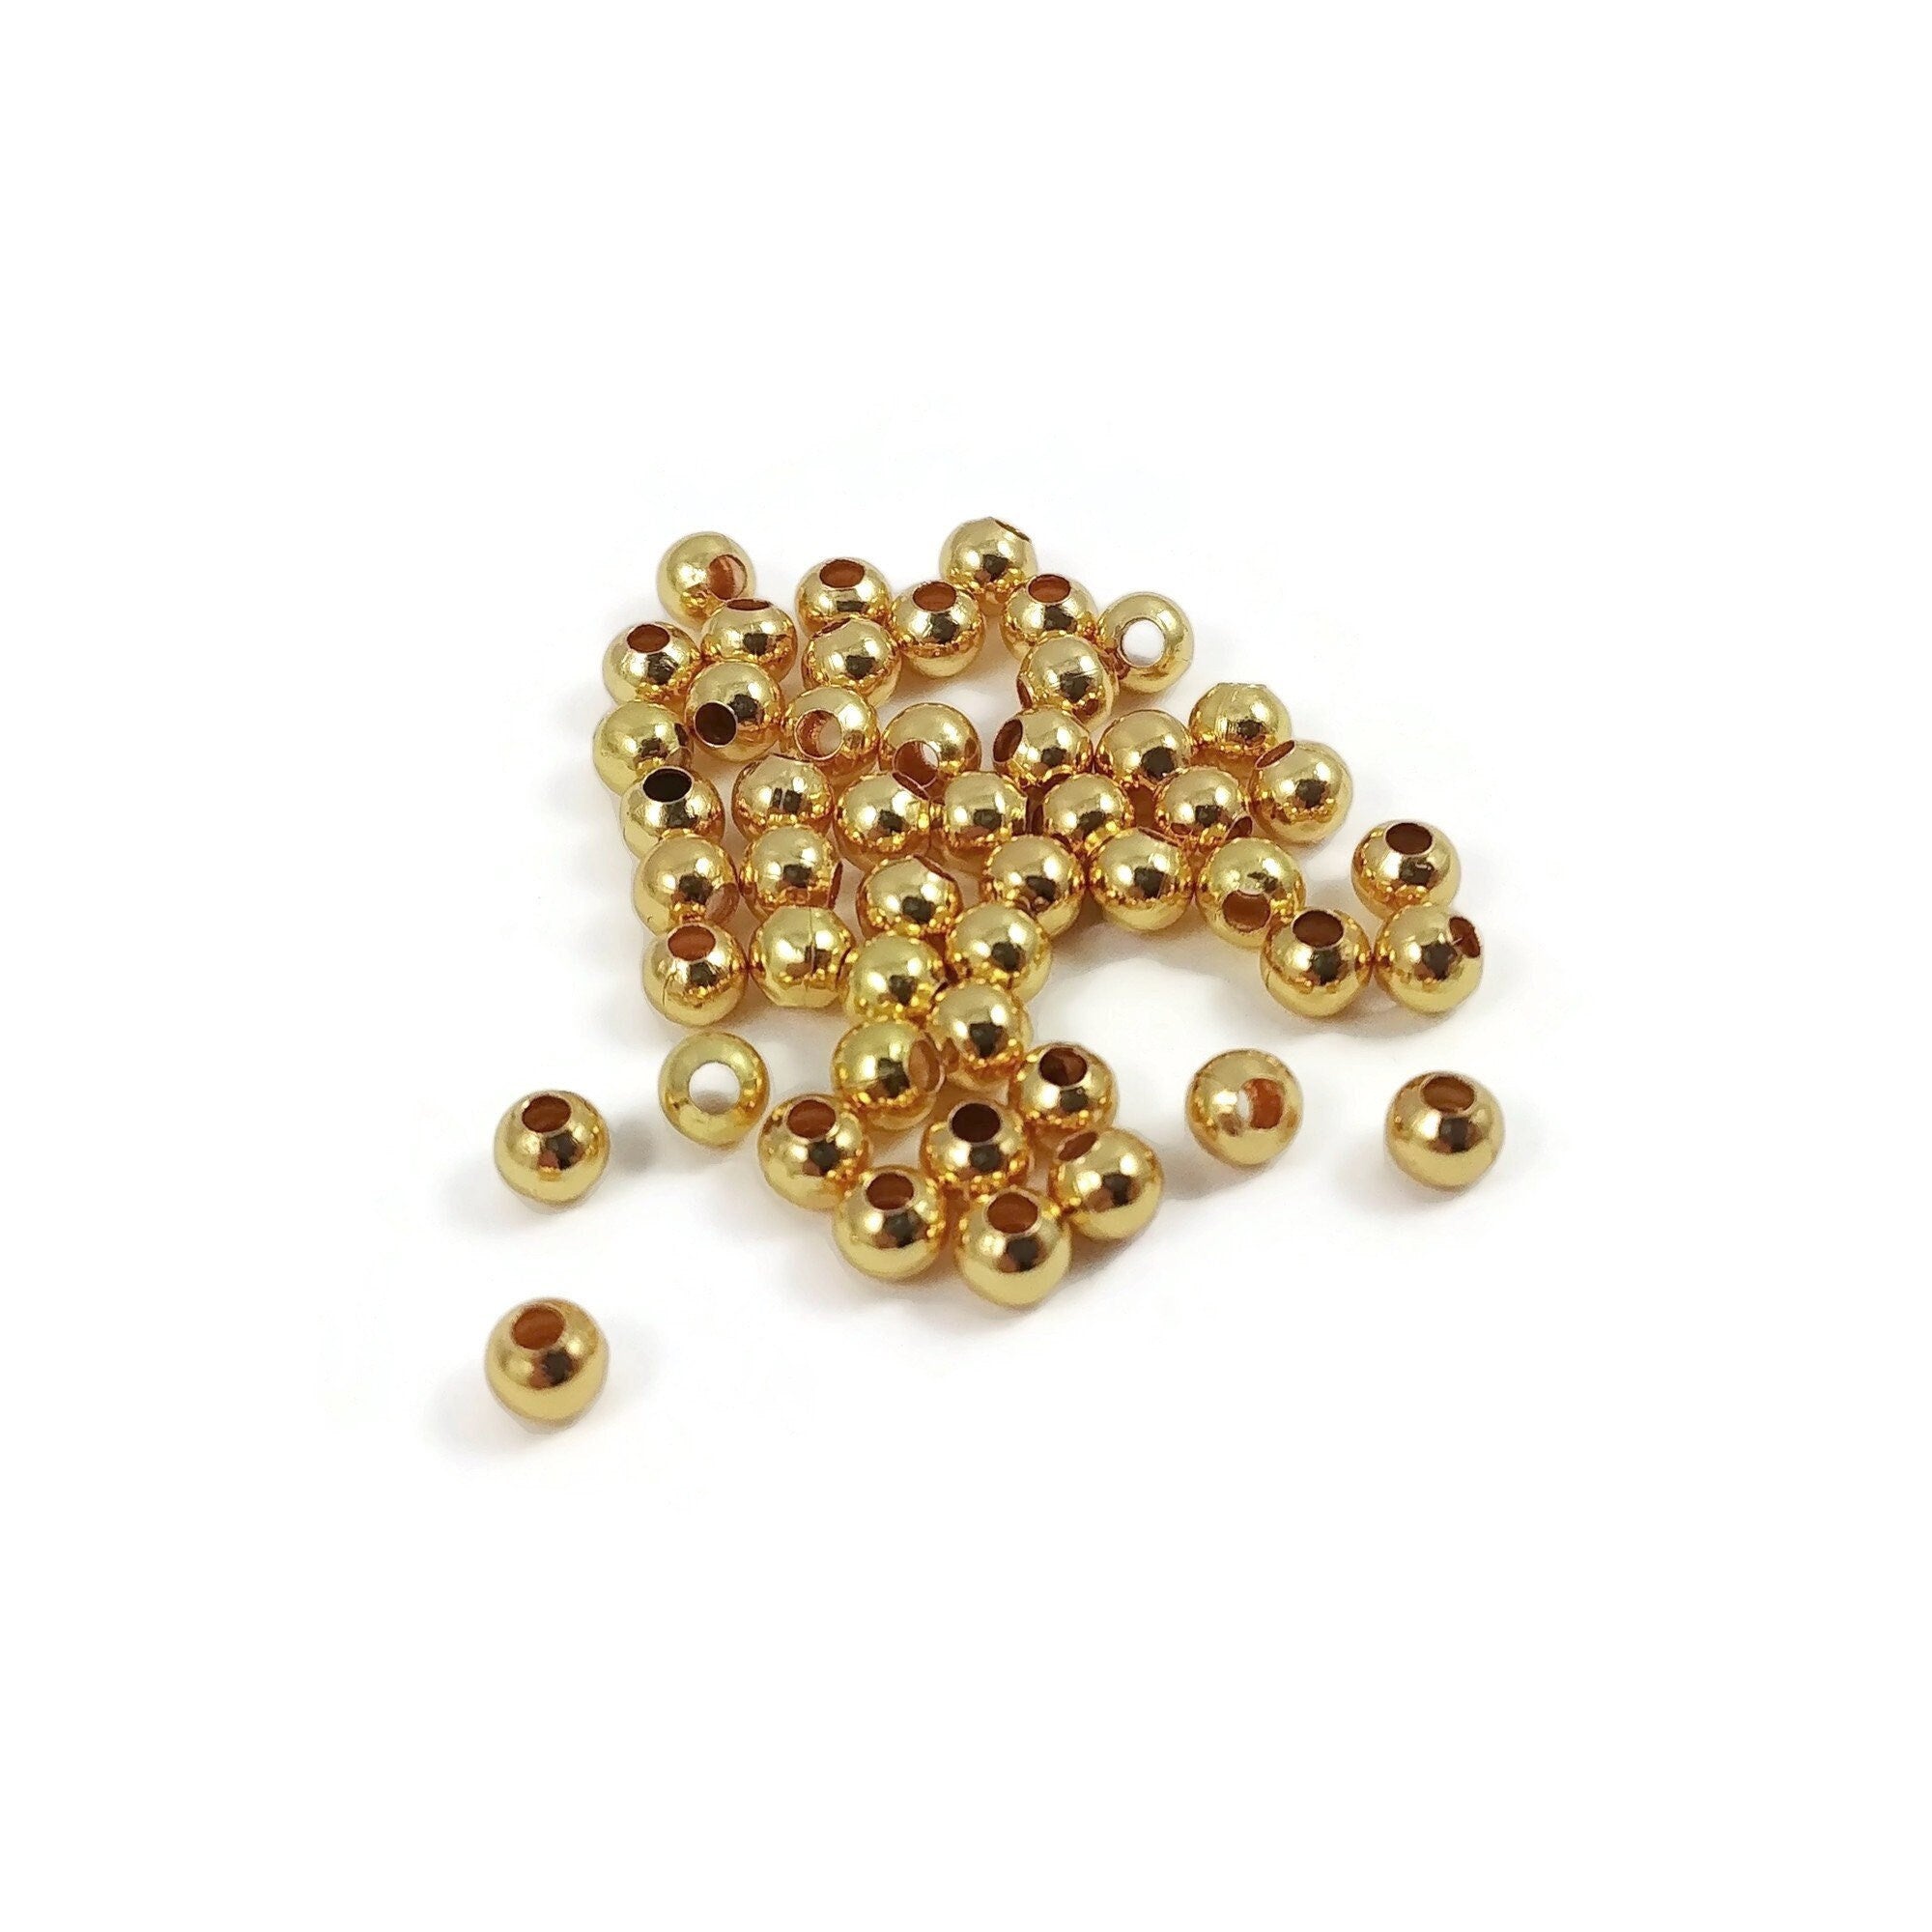 24 Gold plated bead Spacers 